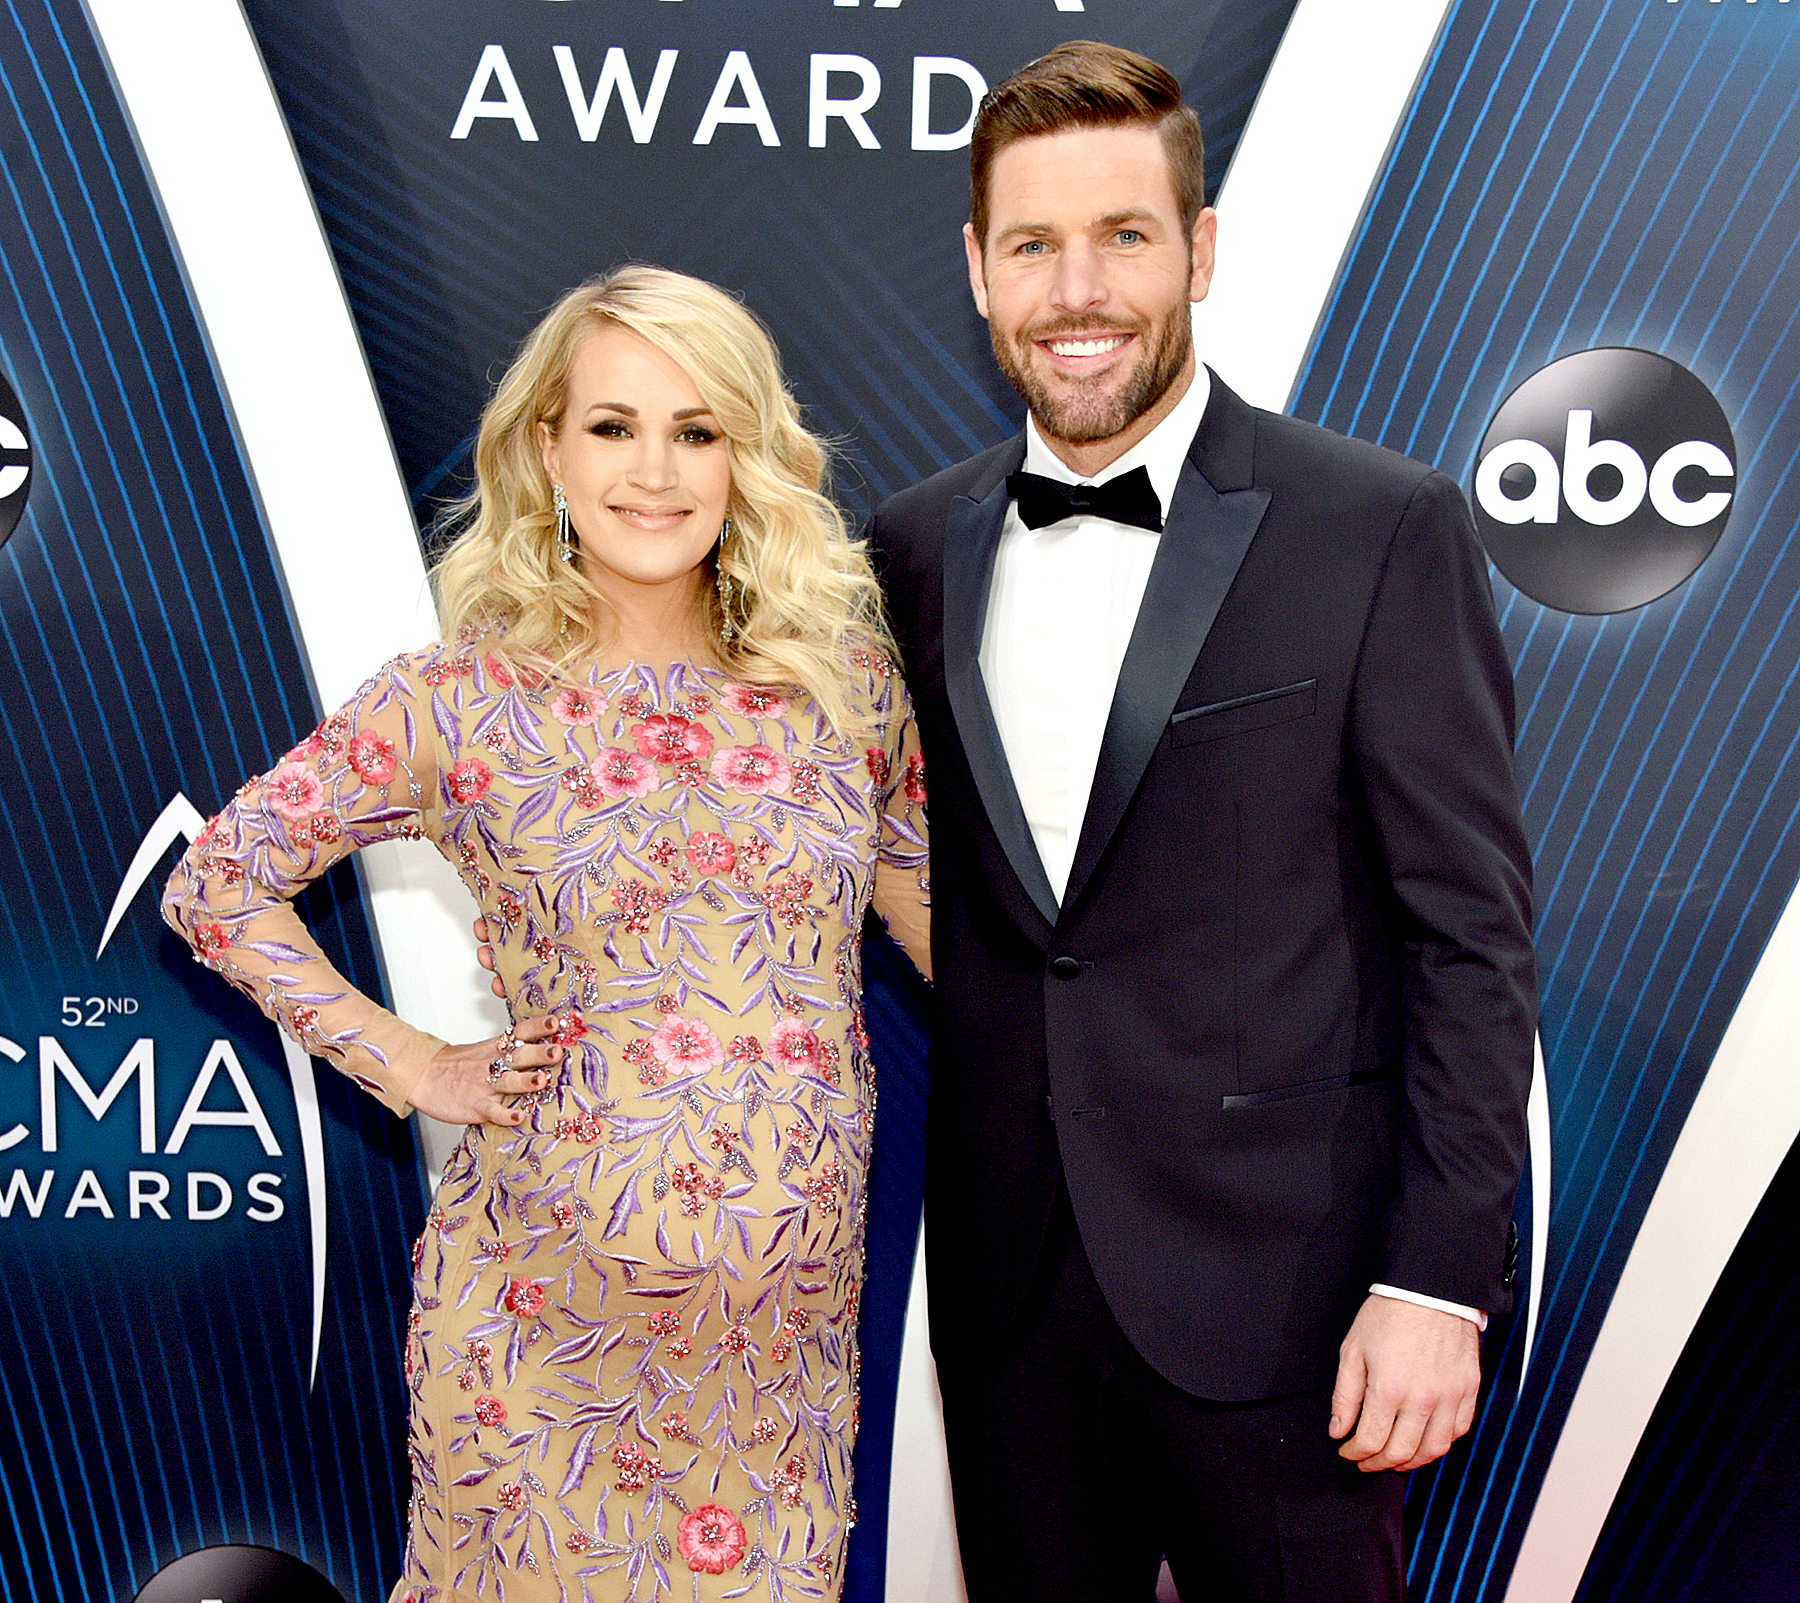 https://www.usmagazine.com/wp-content/uploads/2018/11/Carrie-Underwood-Mike-Fisher-pregnant-clothes.jpg?quality=40&strip=all